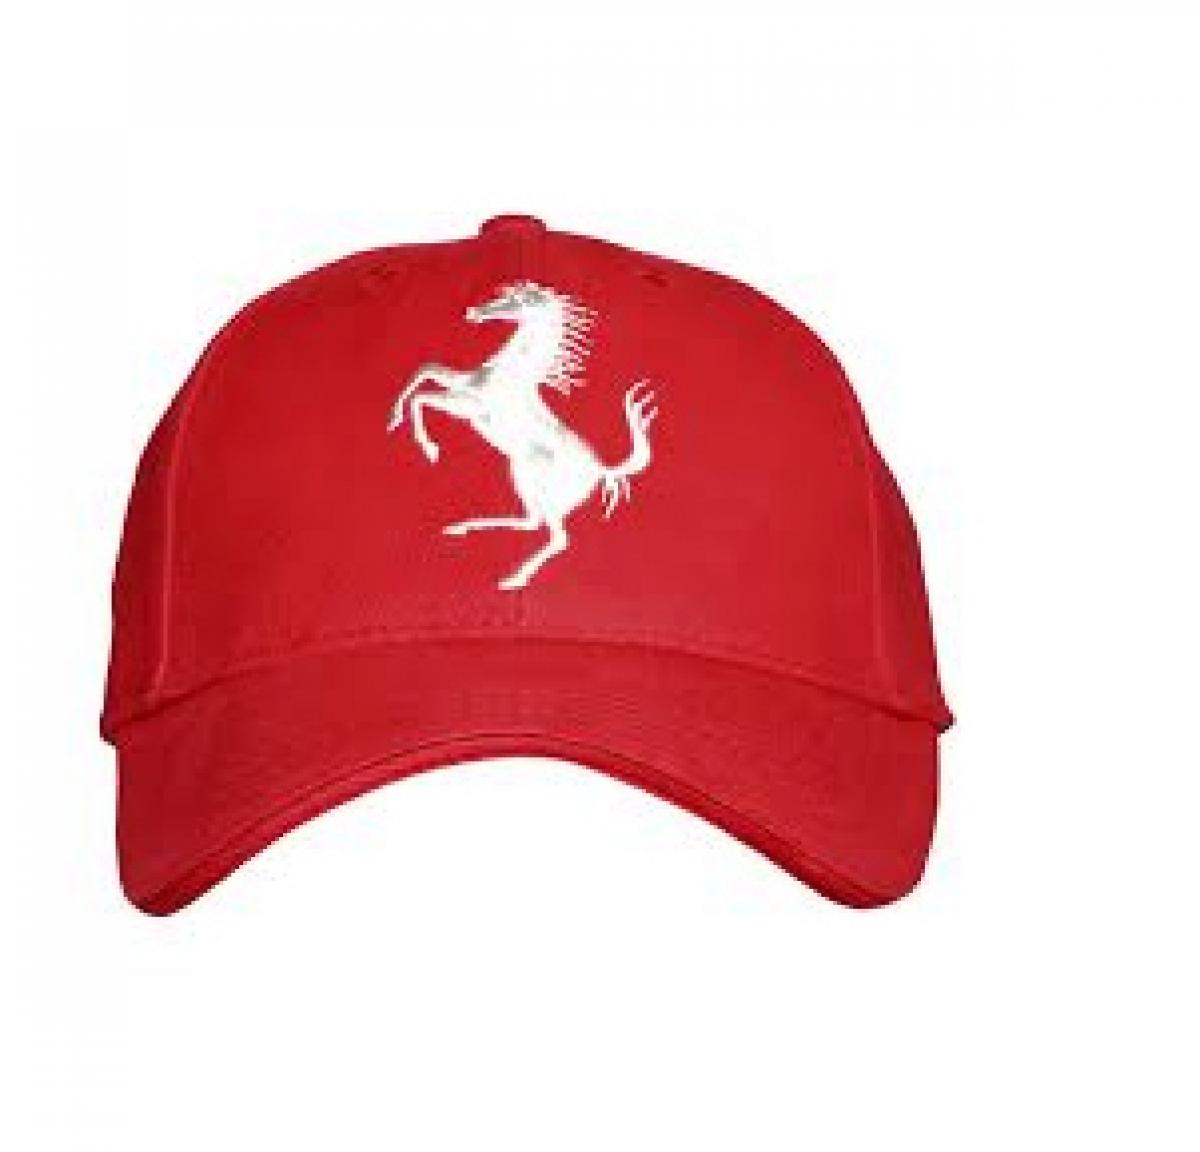 Official Ferrari merchandise now exclusively on the Myntra App